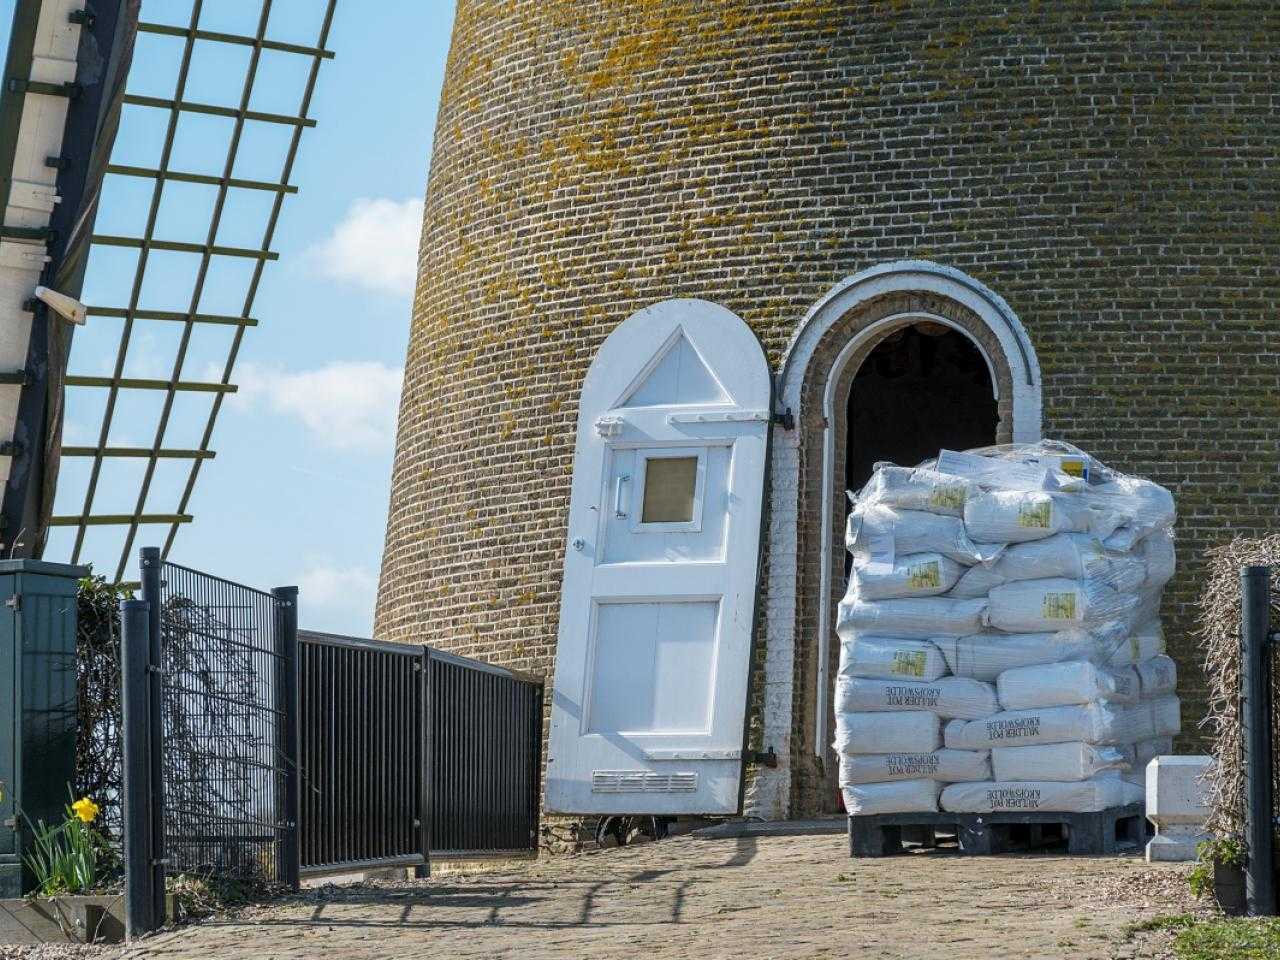 Entrance to Molen de Eersteling with a large pile of sacks of flour in front of the entrance